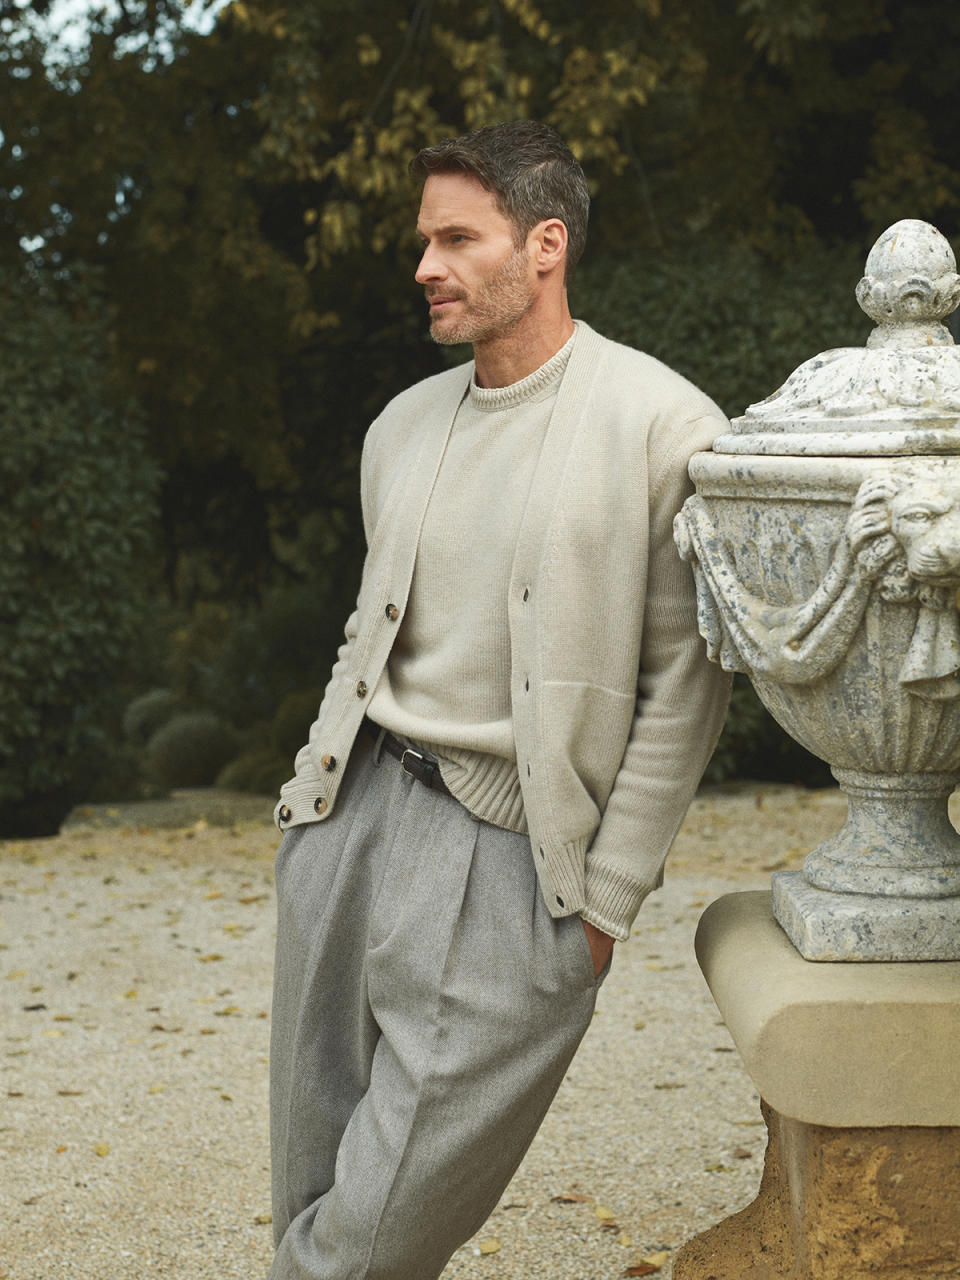 On him: Loro Piana baby cashmere cardigan, $4,750, sweater, $3,150, and wool, linen, and cashmere pants, $1,400; Giorgio Armani belt, $425.